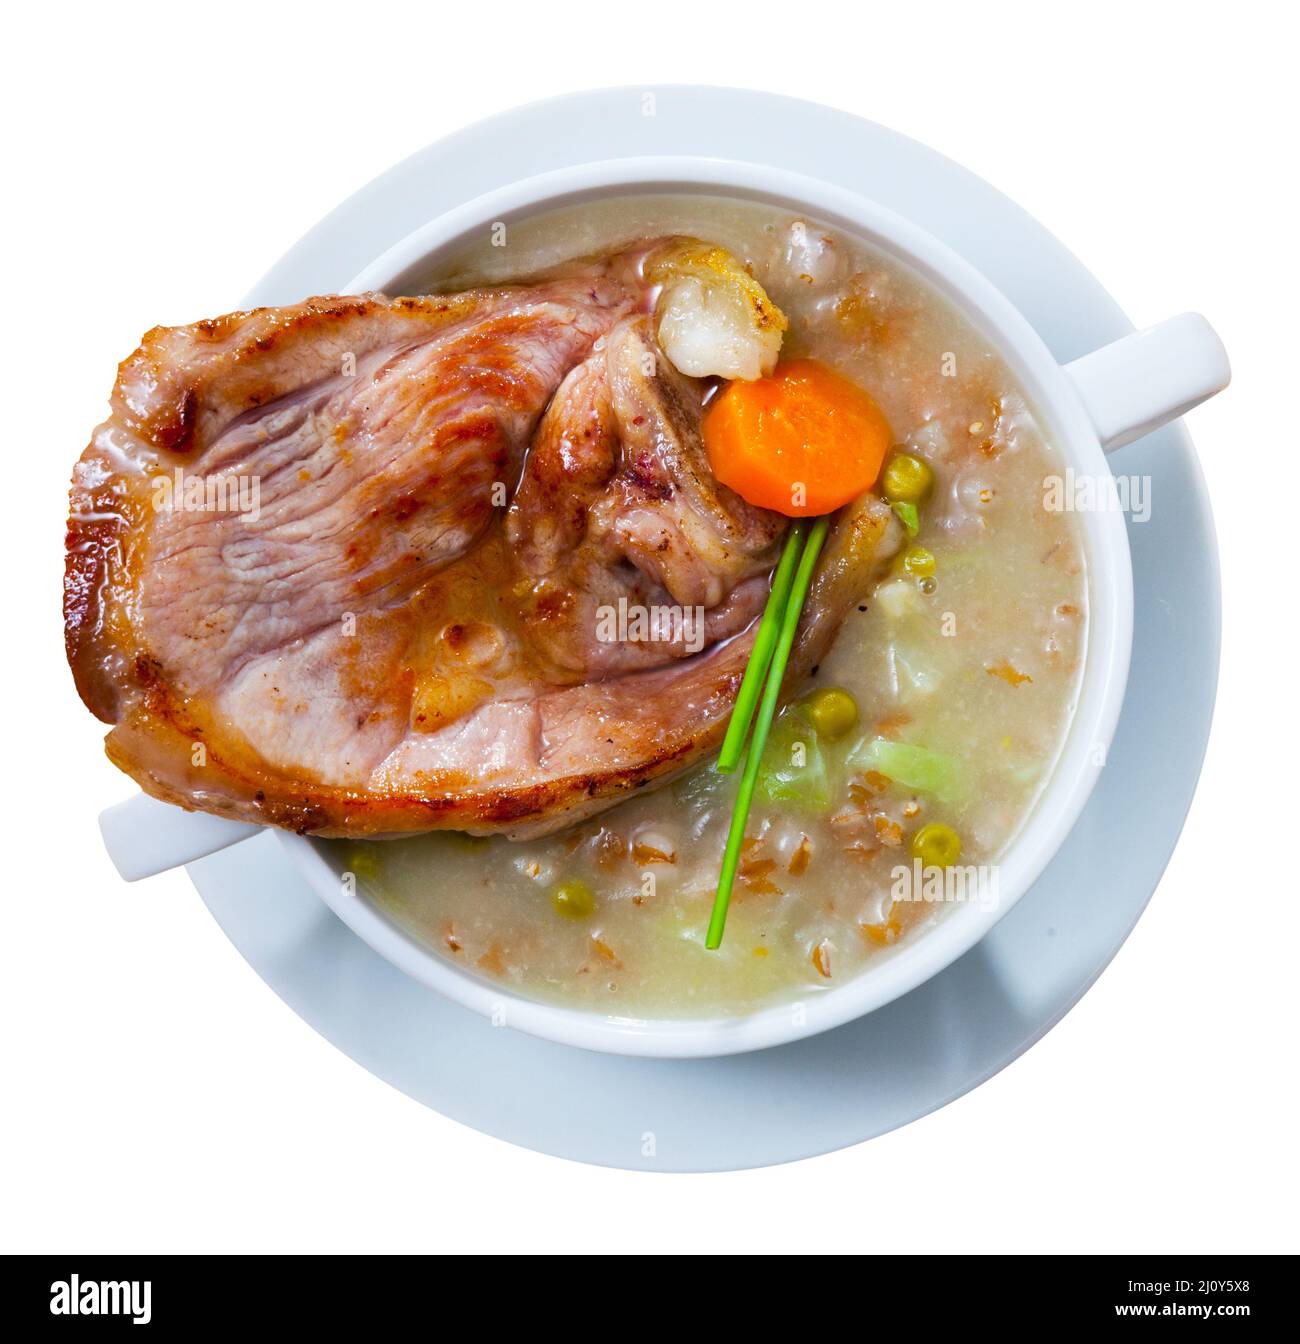 Scotch broth with barley, lamb, vegetables and peas Stock Photo